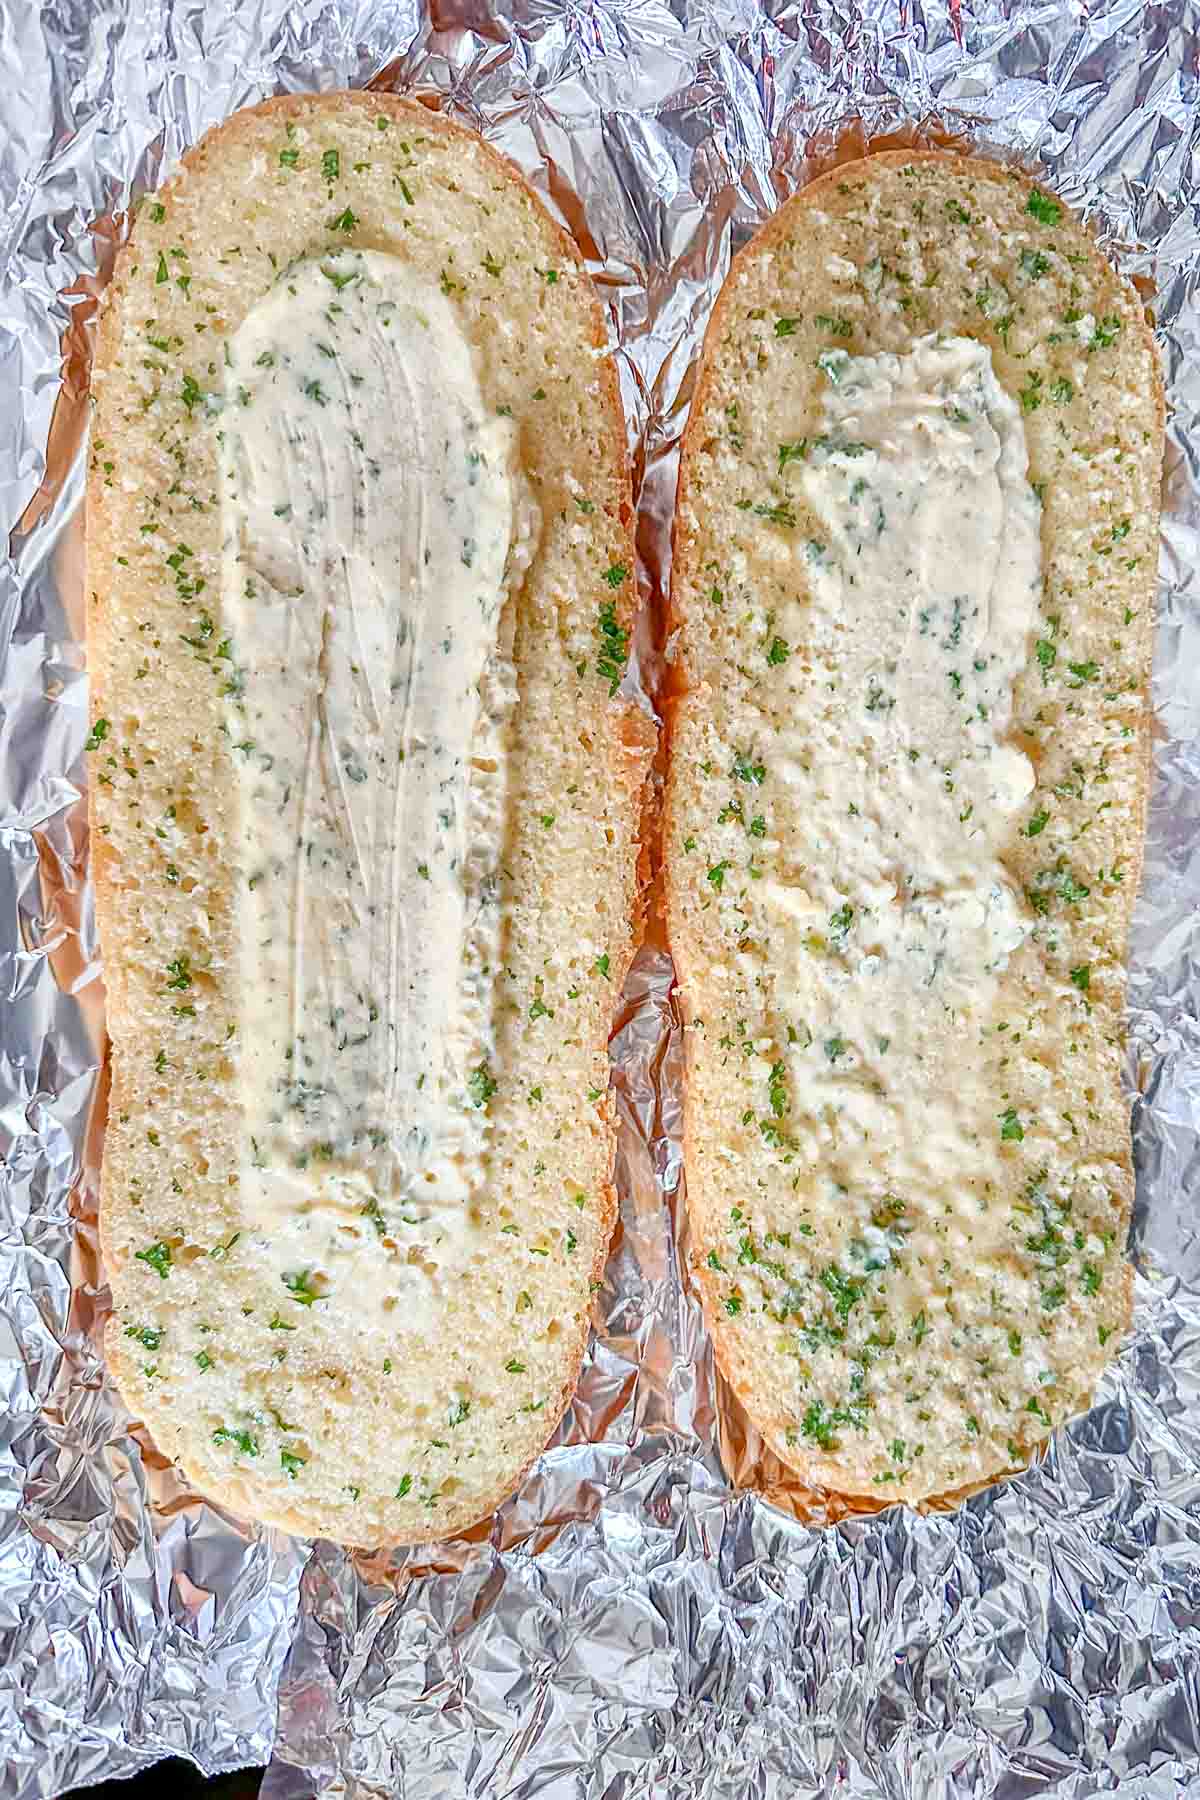 Parbaked garlic bread on foil.